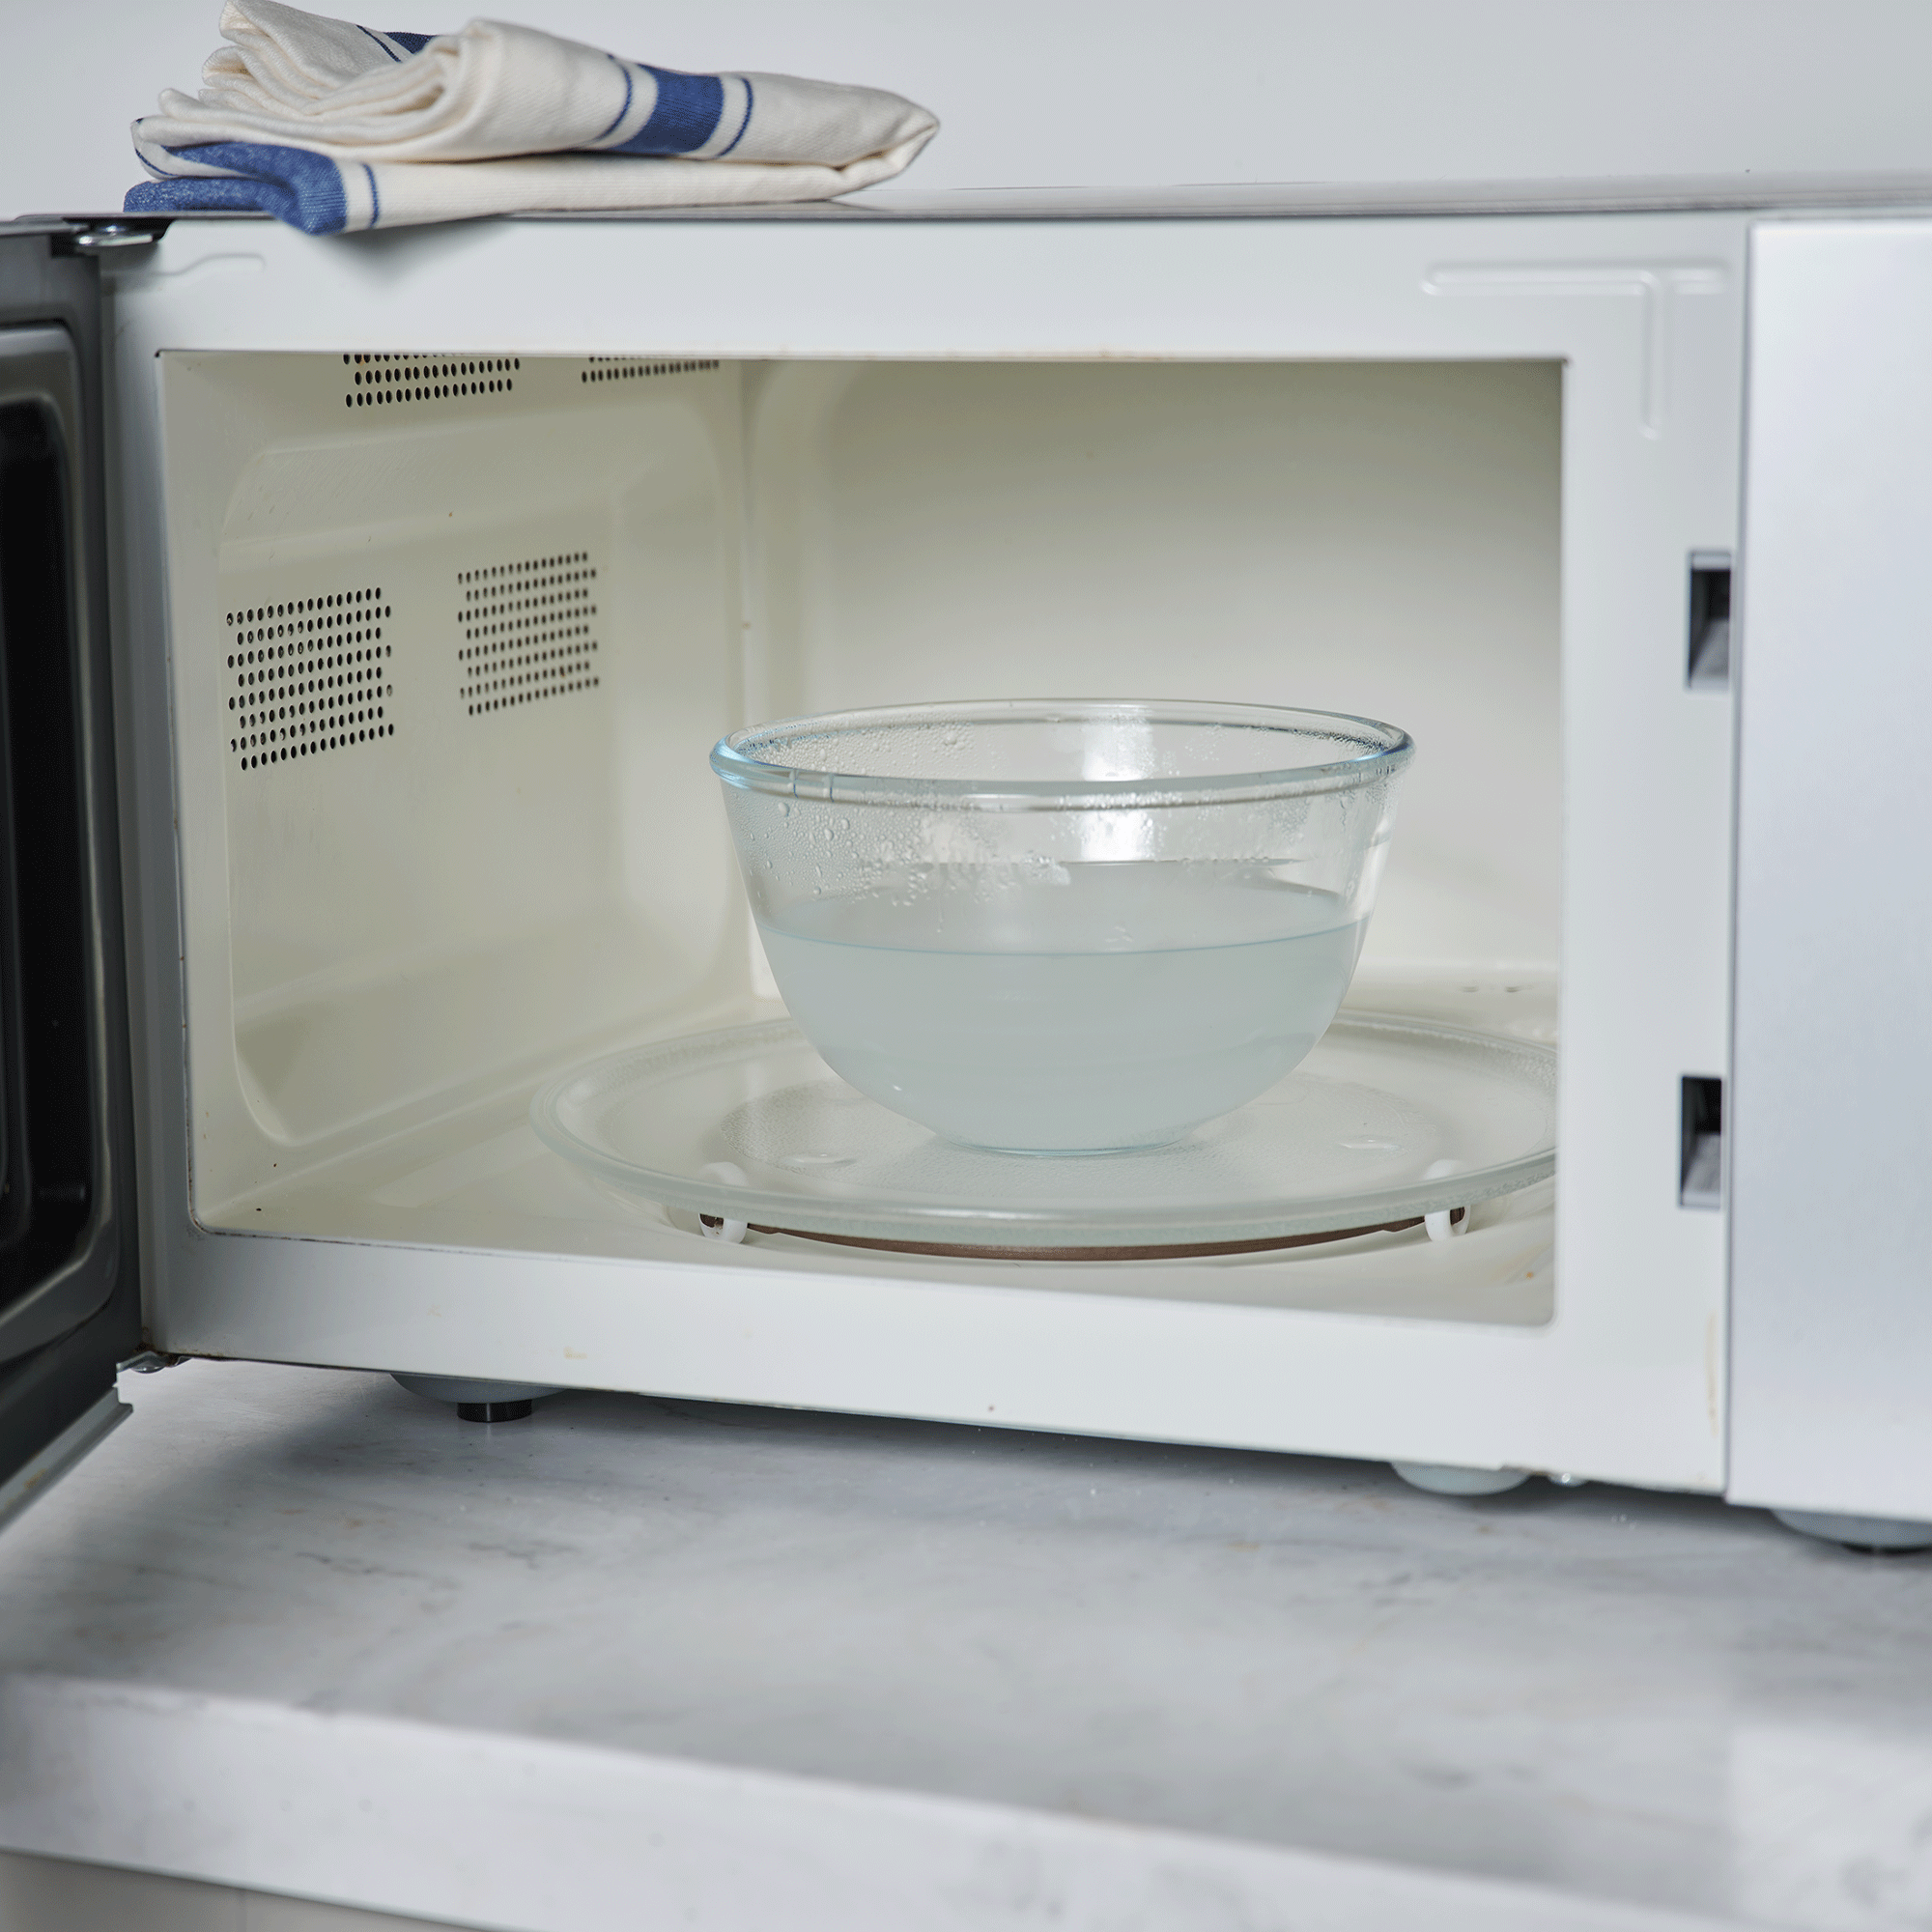 White microwave with bowl of vinegar